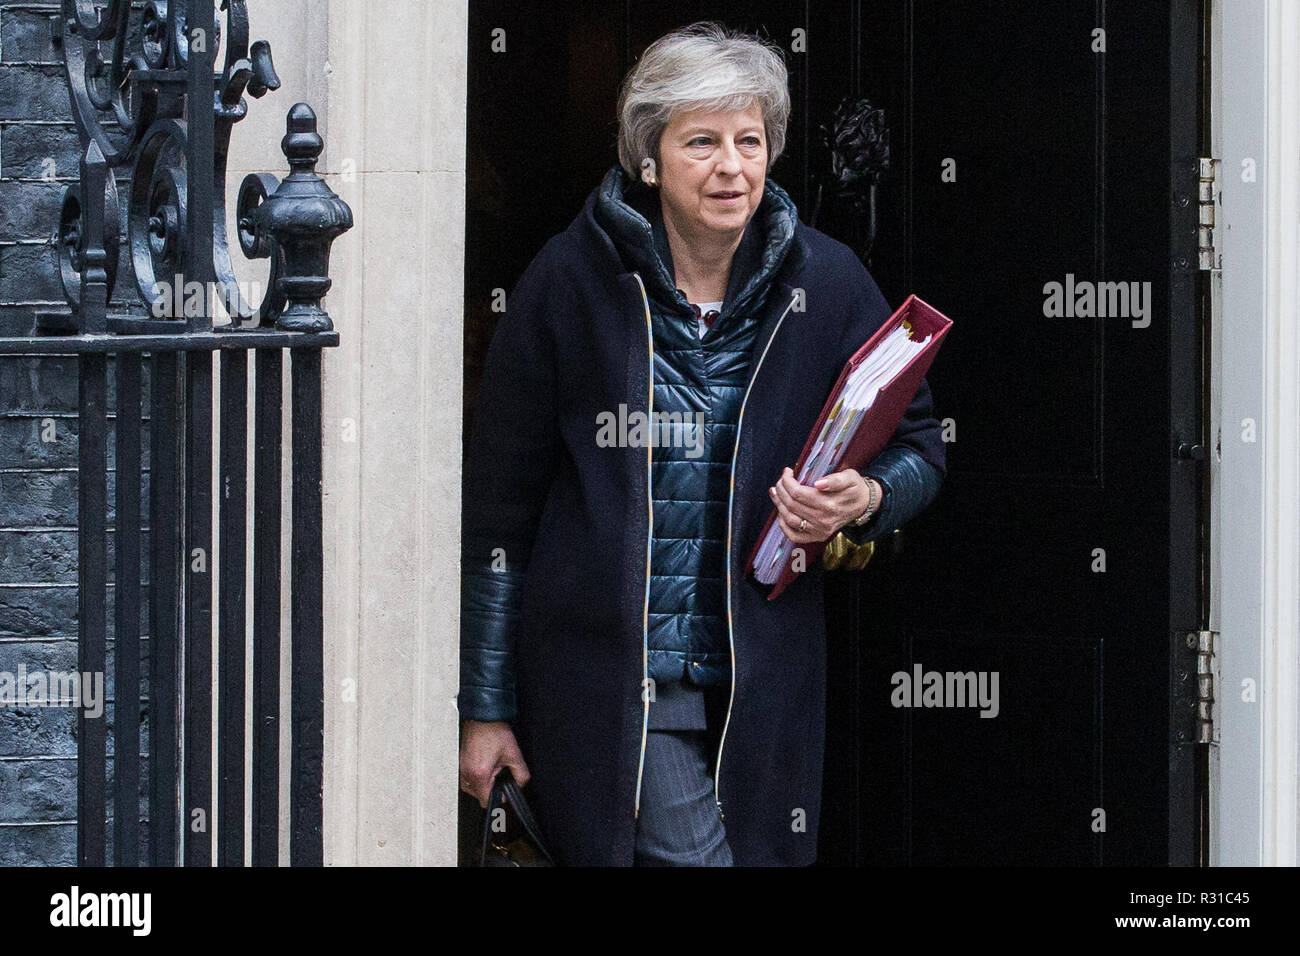 London, UK. 21st November, 2018. Prime Minister Theresa May leaves 10 Downing Street to attend Prime Minister's Questions in the House of Commons on the day on which she is scheduled to travel to Brussels to attend discussions with Jean-Claude Juncker, President of the European Commission, regarding a political declaration to accompany the EU withdrawal agreement. Credit: Mark Kerrison/Alamy Live News Stock Photo